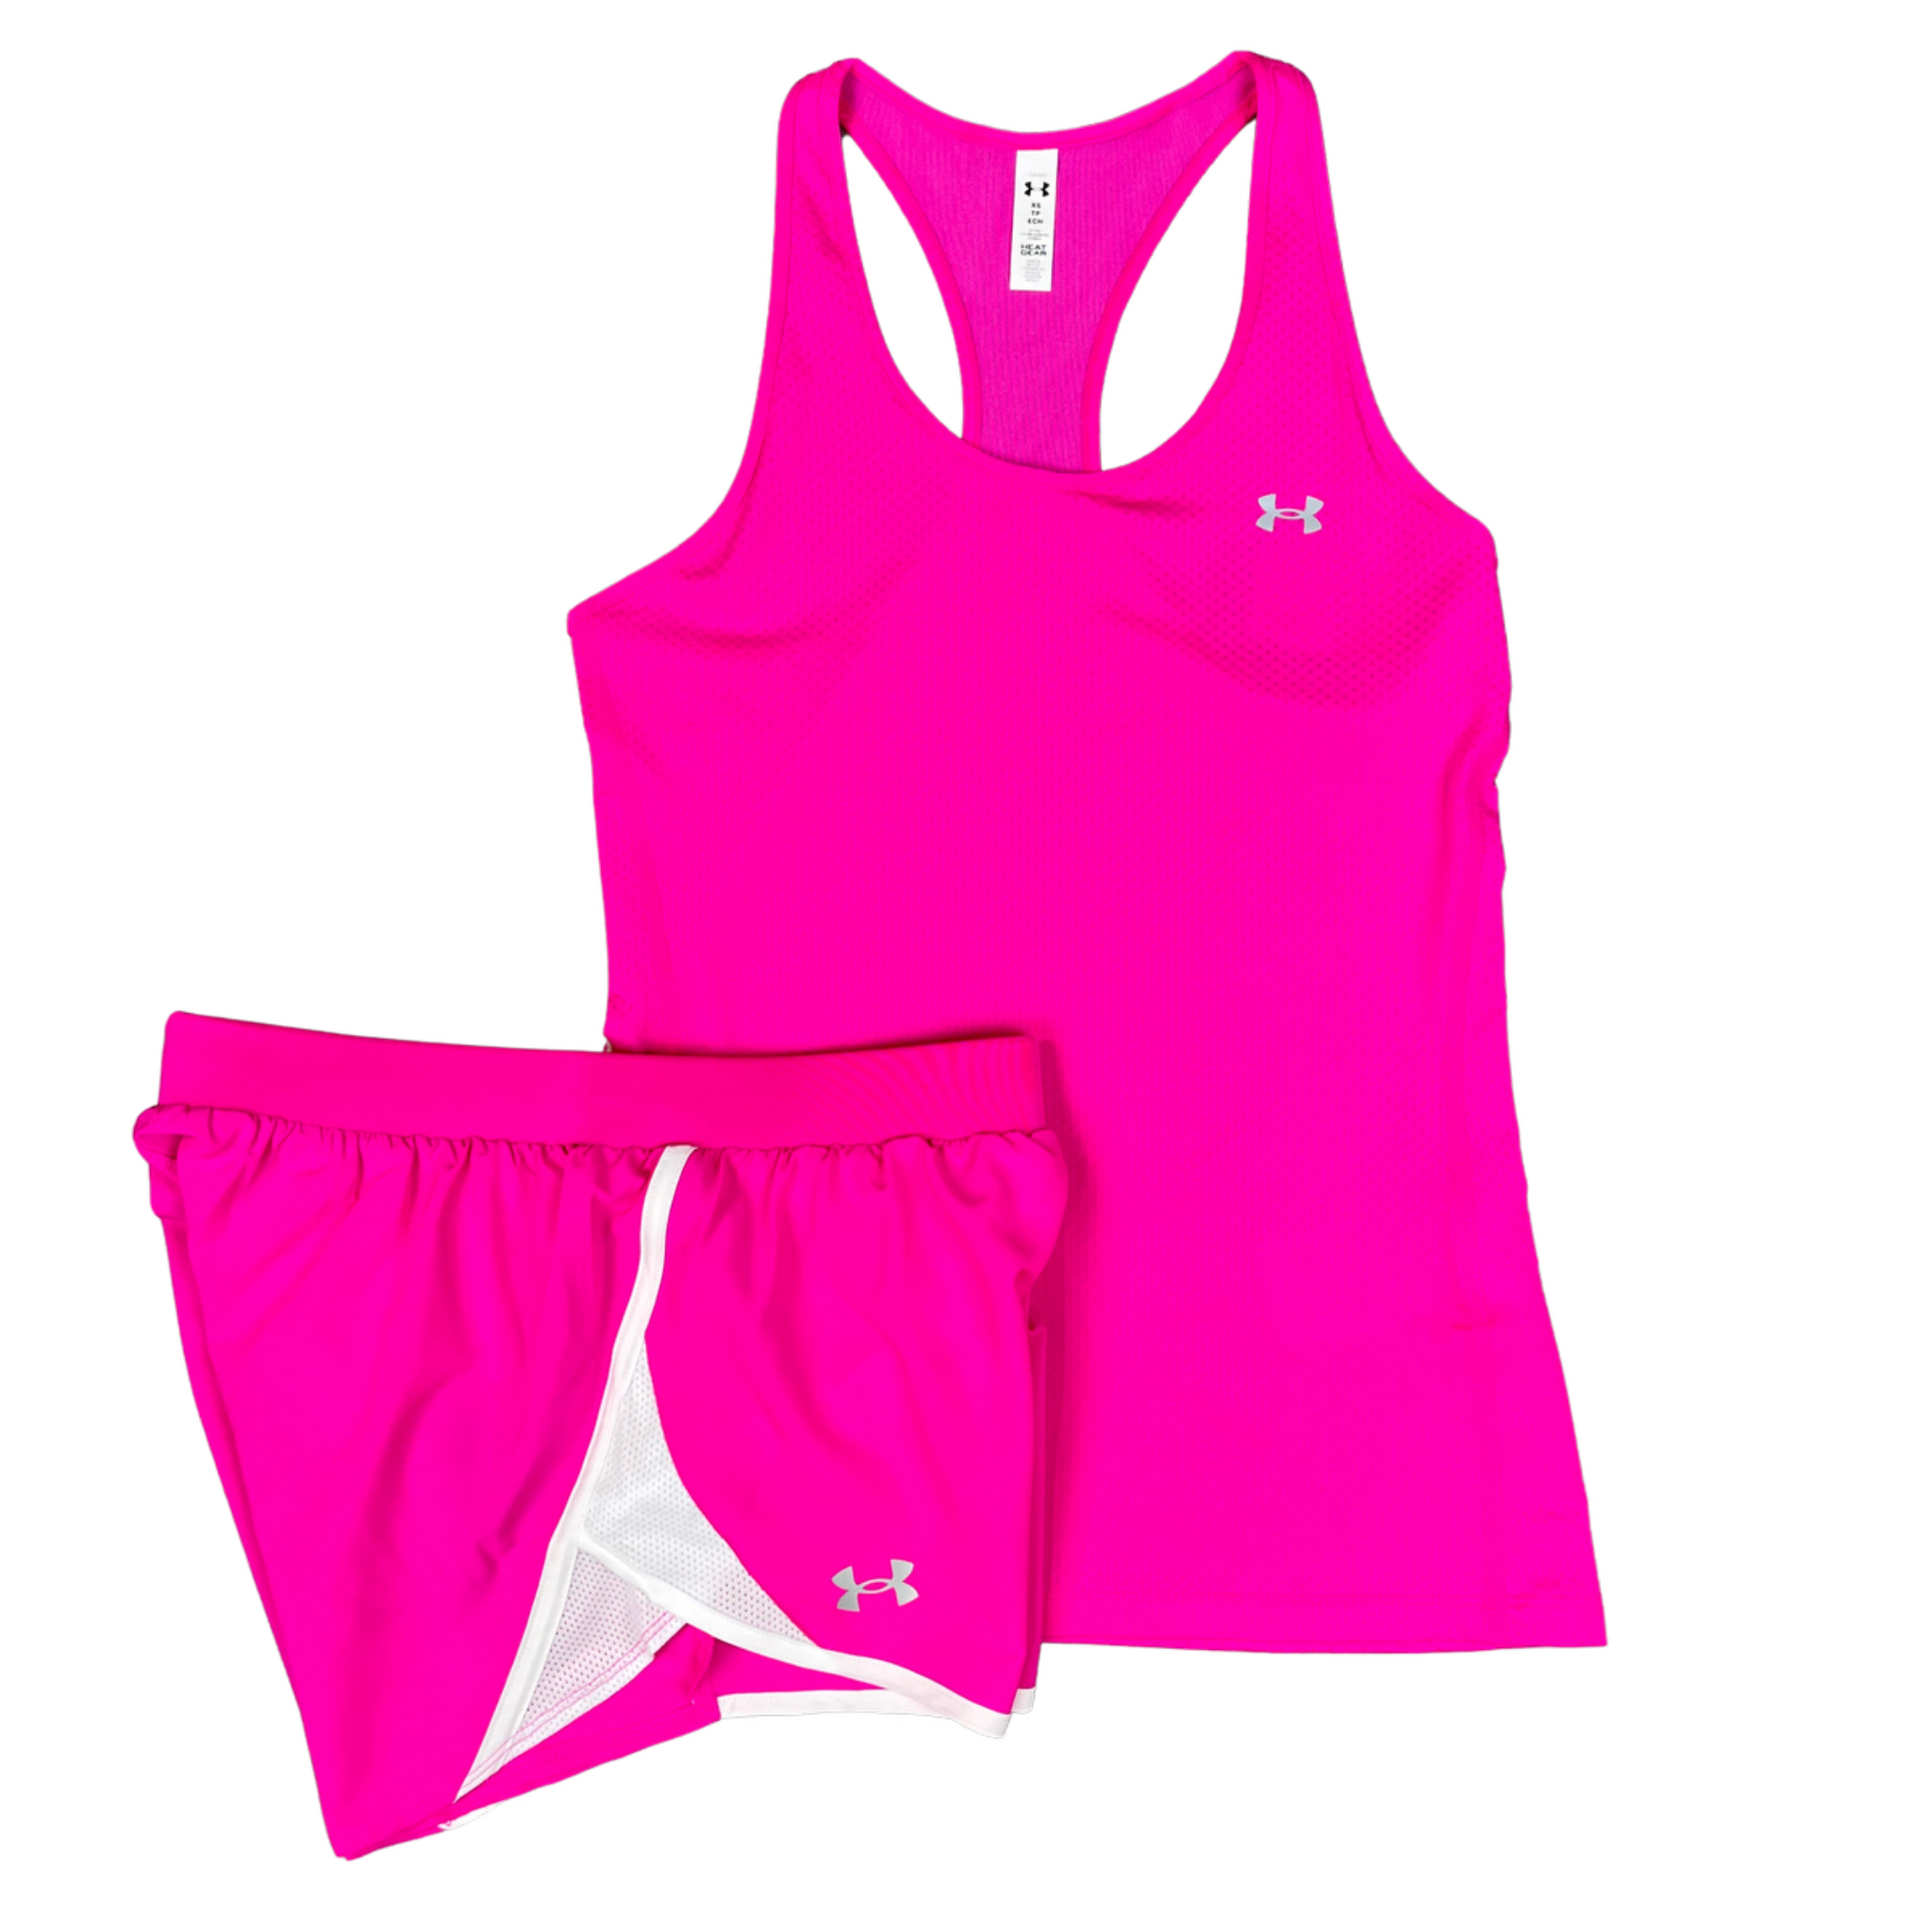 UNDER ARMOUR WOMENS RACER TANK TOP / FLY SHORTS SET - PINK